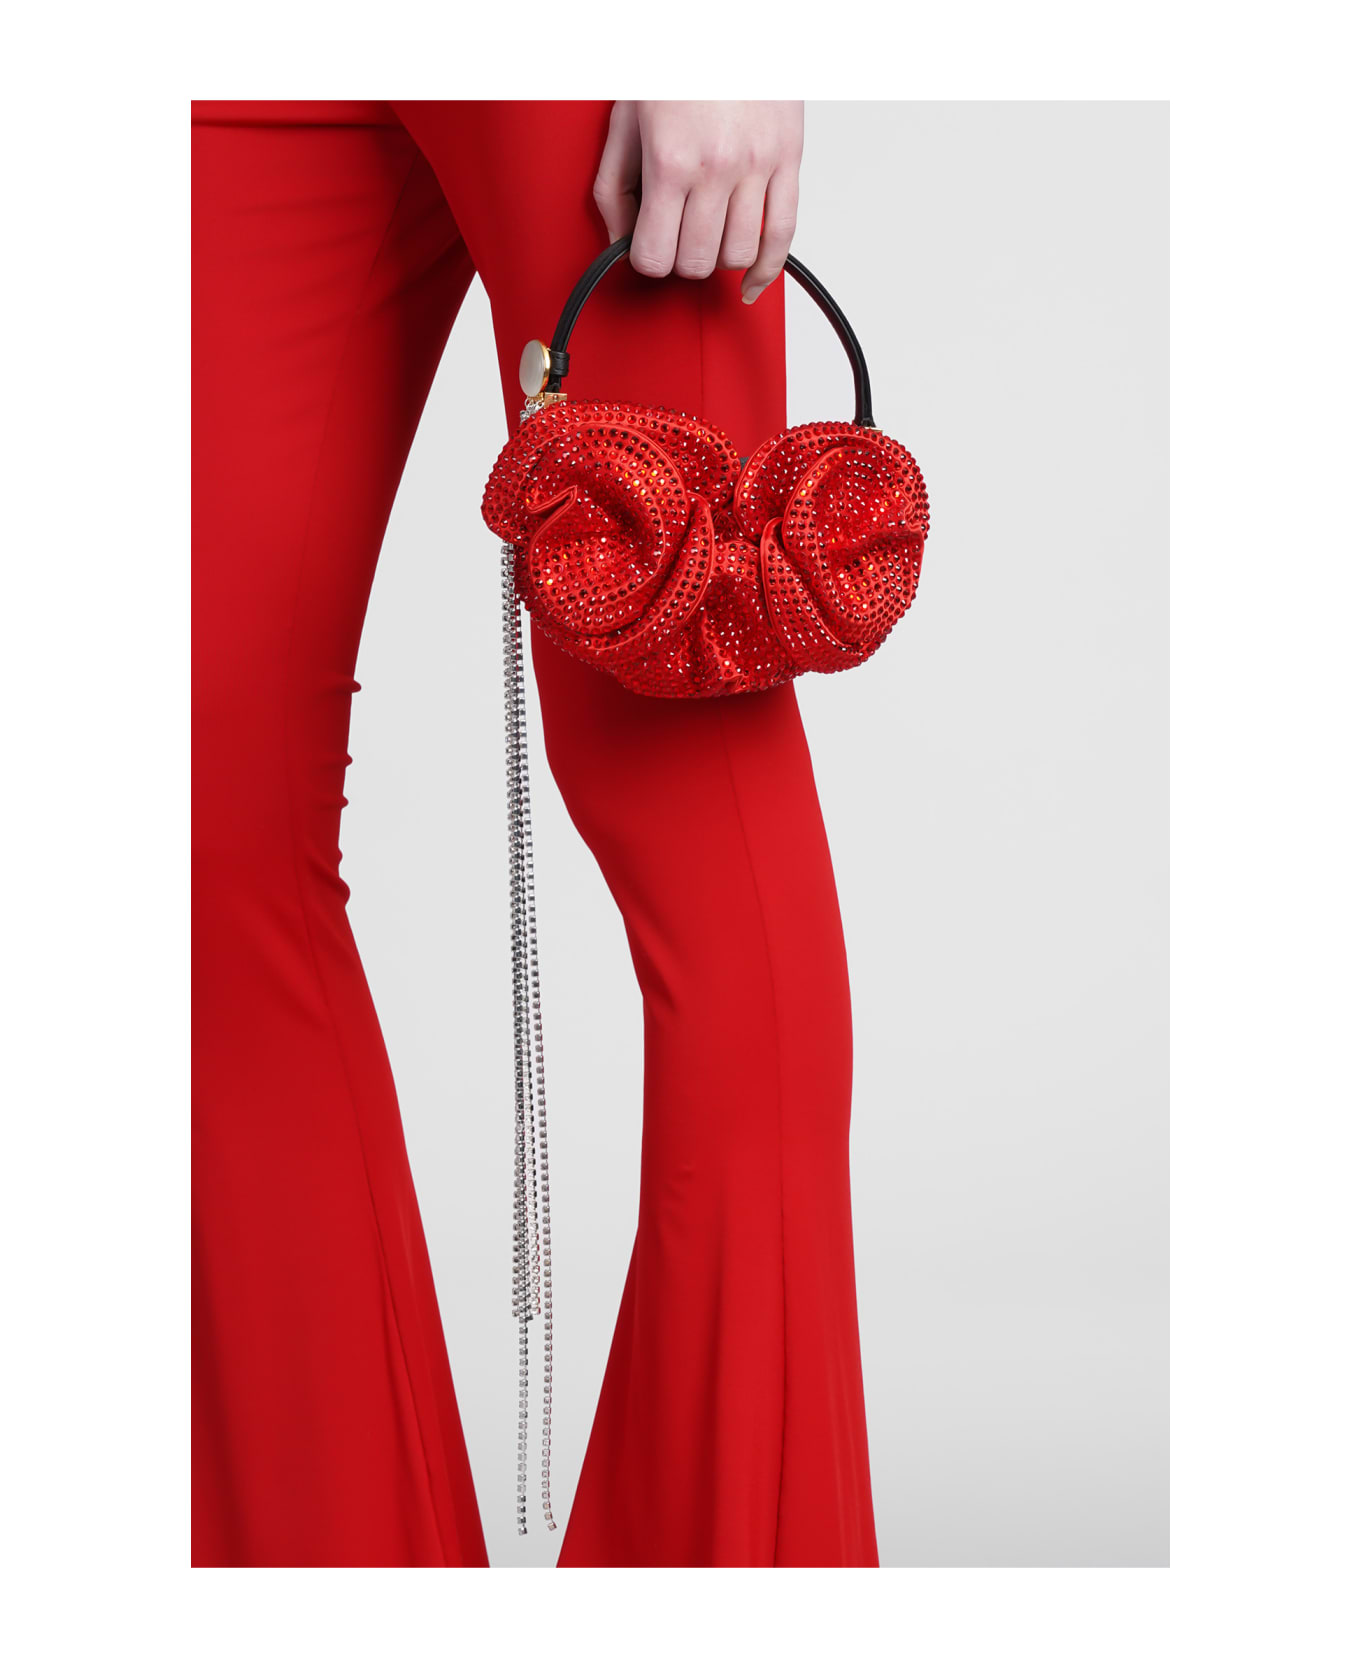 Magda Butrym Hand Bag In Red Satin - red